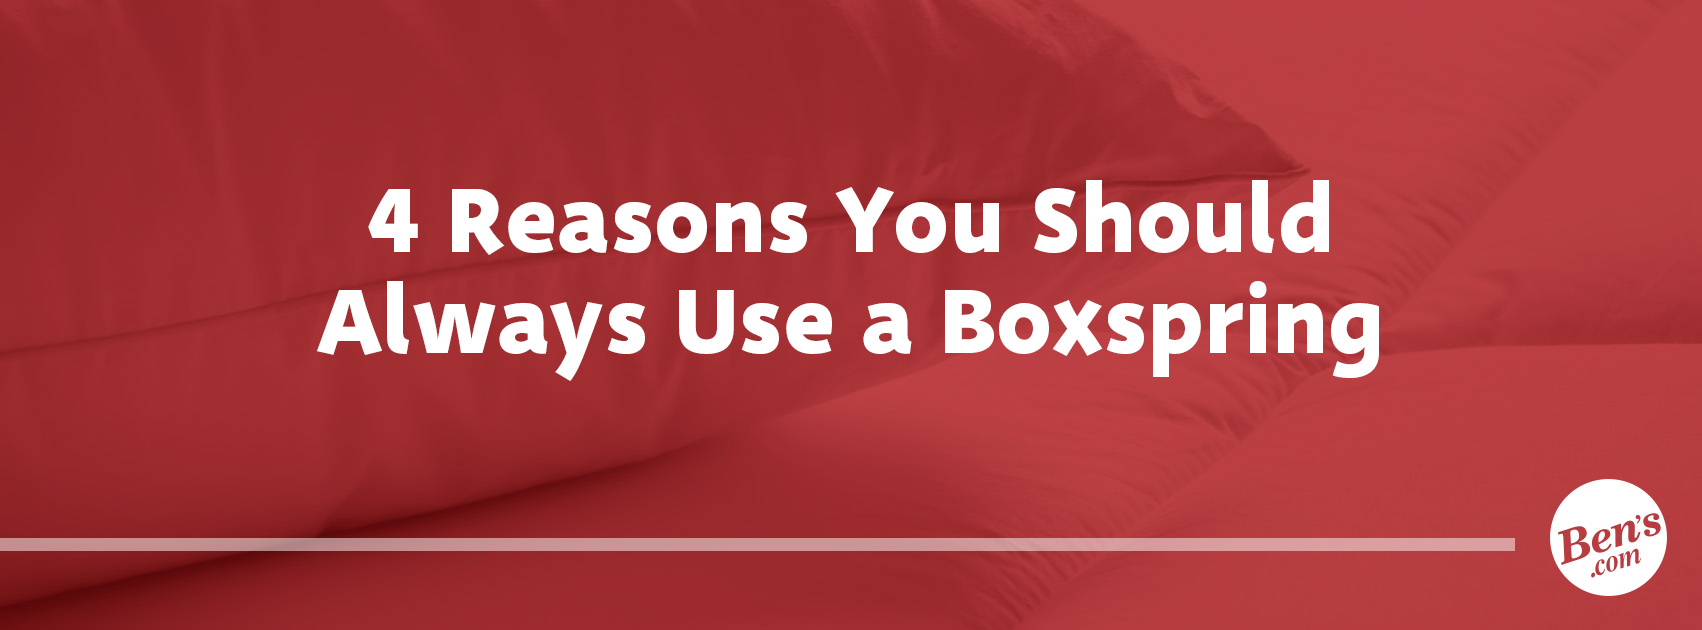 January (5) _ 4 Reasons You Should Always Use a Boxspring